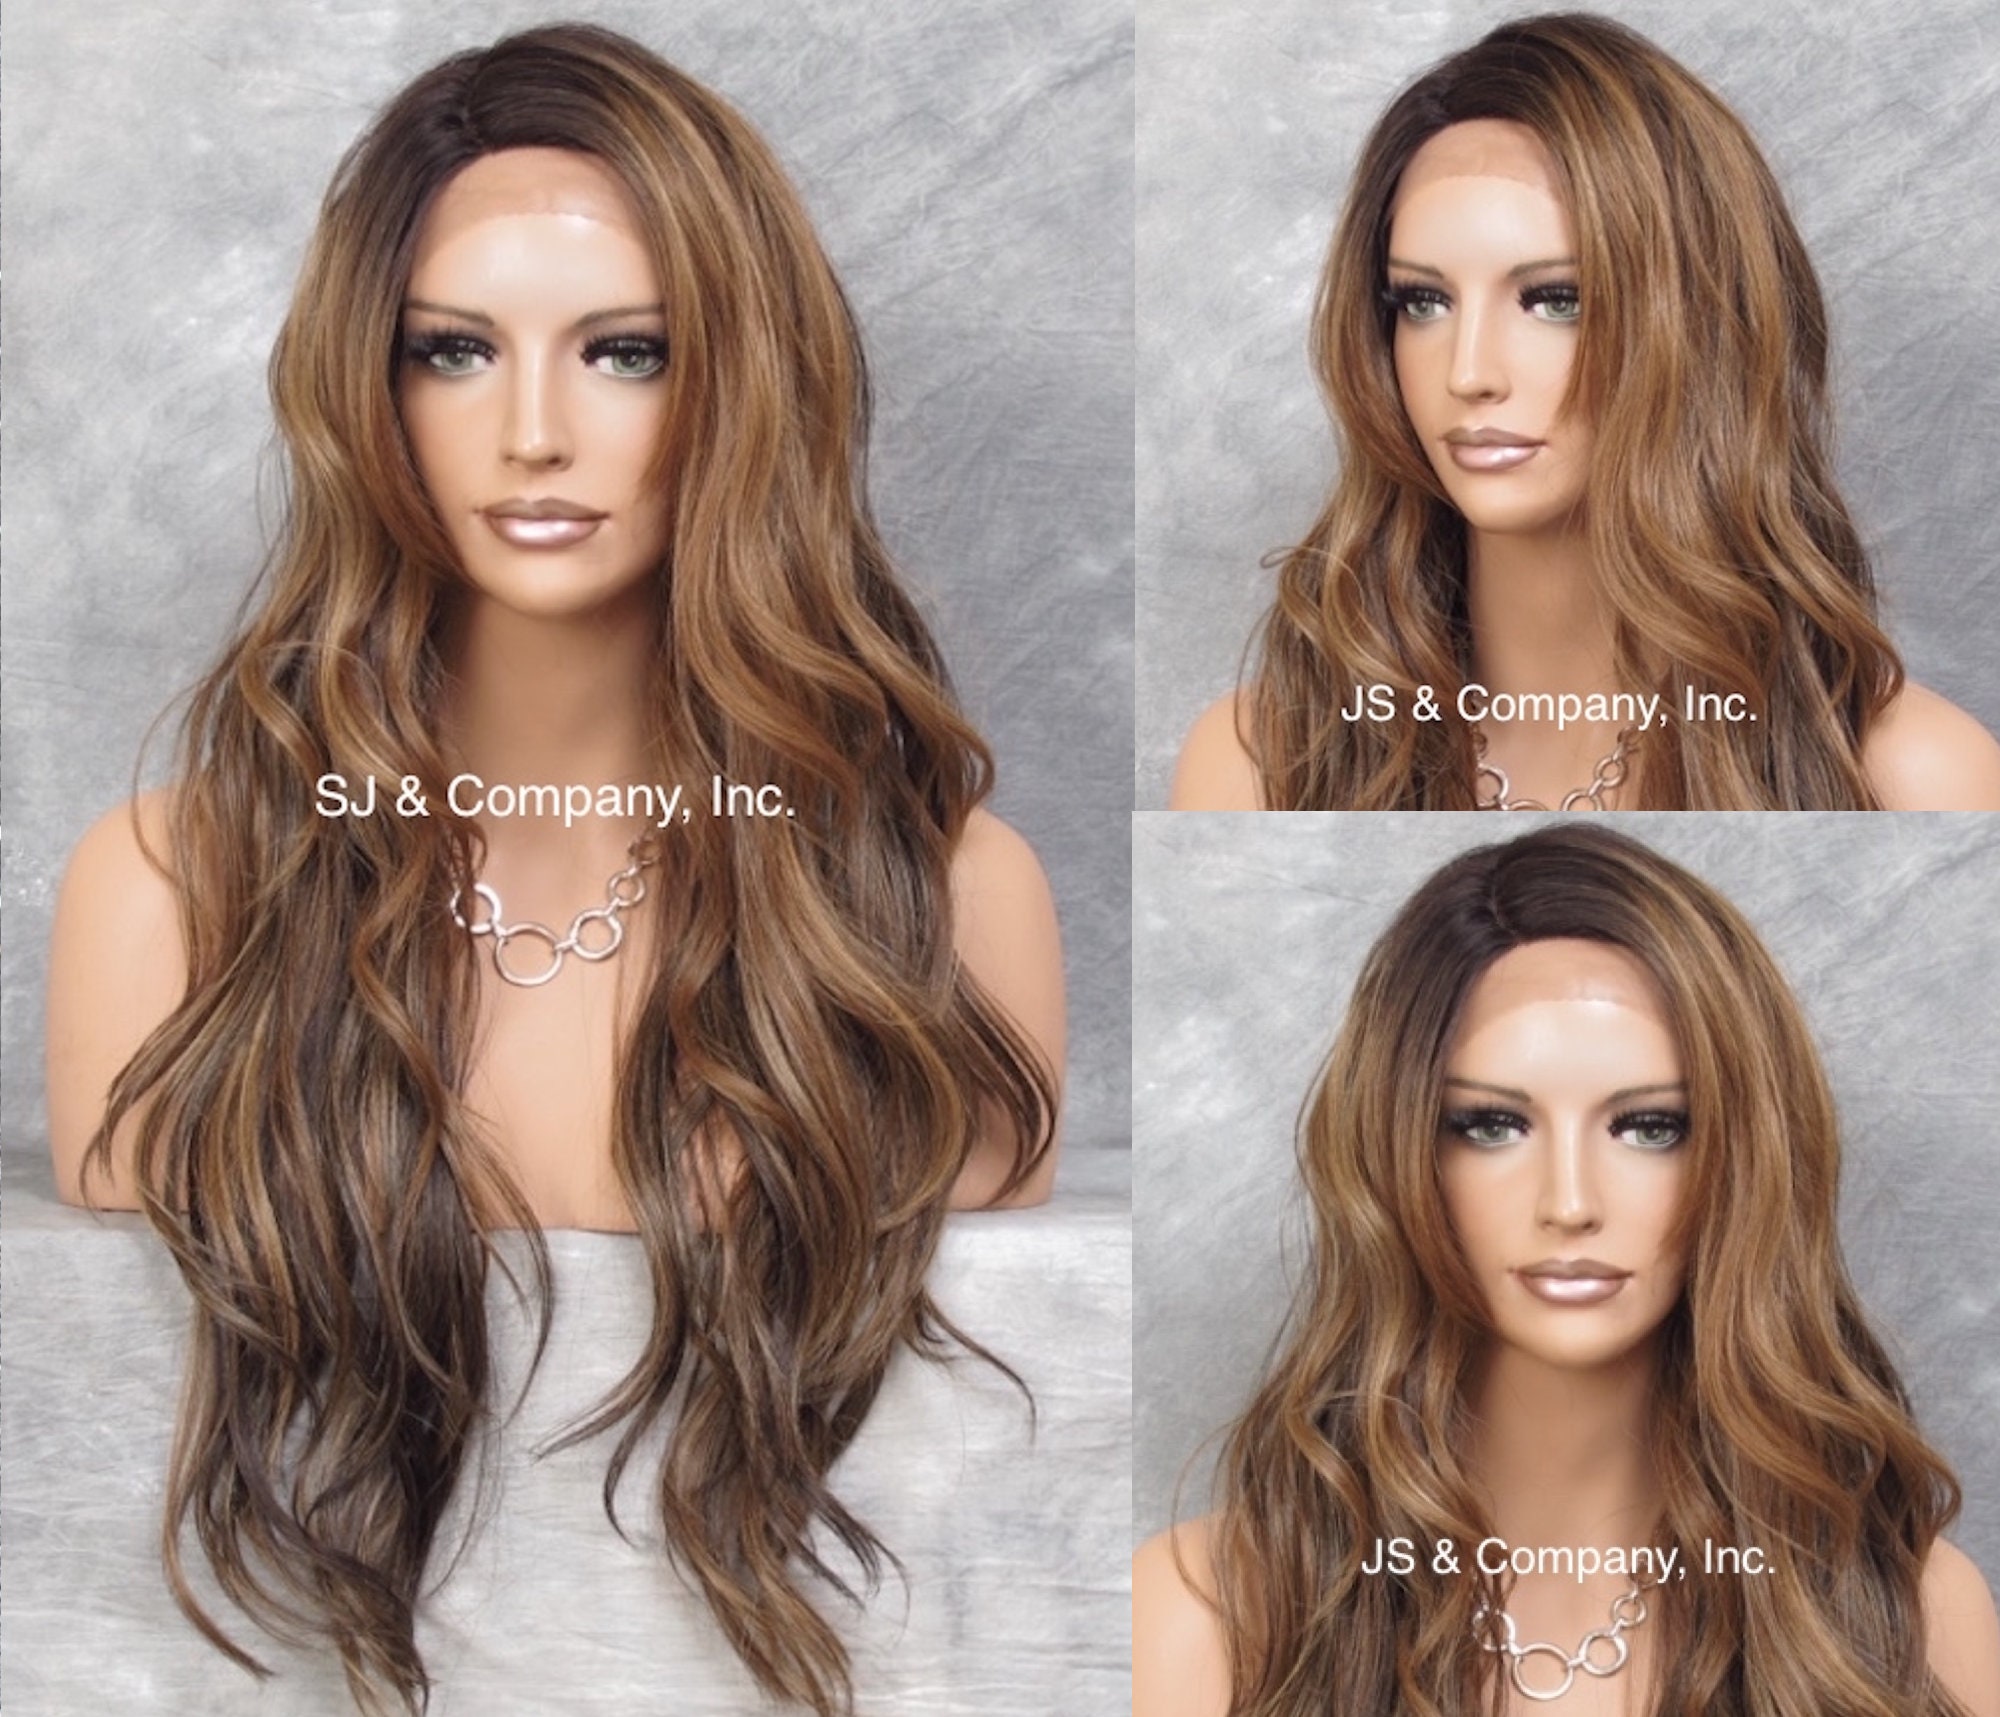 Human Hair Blend Heat Ok Full Lace Front Wig Wavy Carmel Brown Mix Darker Roots Long Side Hand Tied Part Cancer/Alopecia/Cosplay